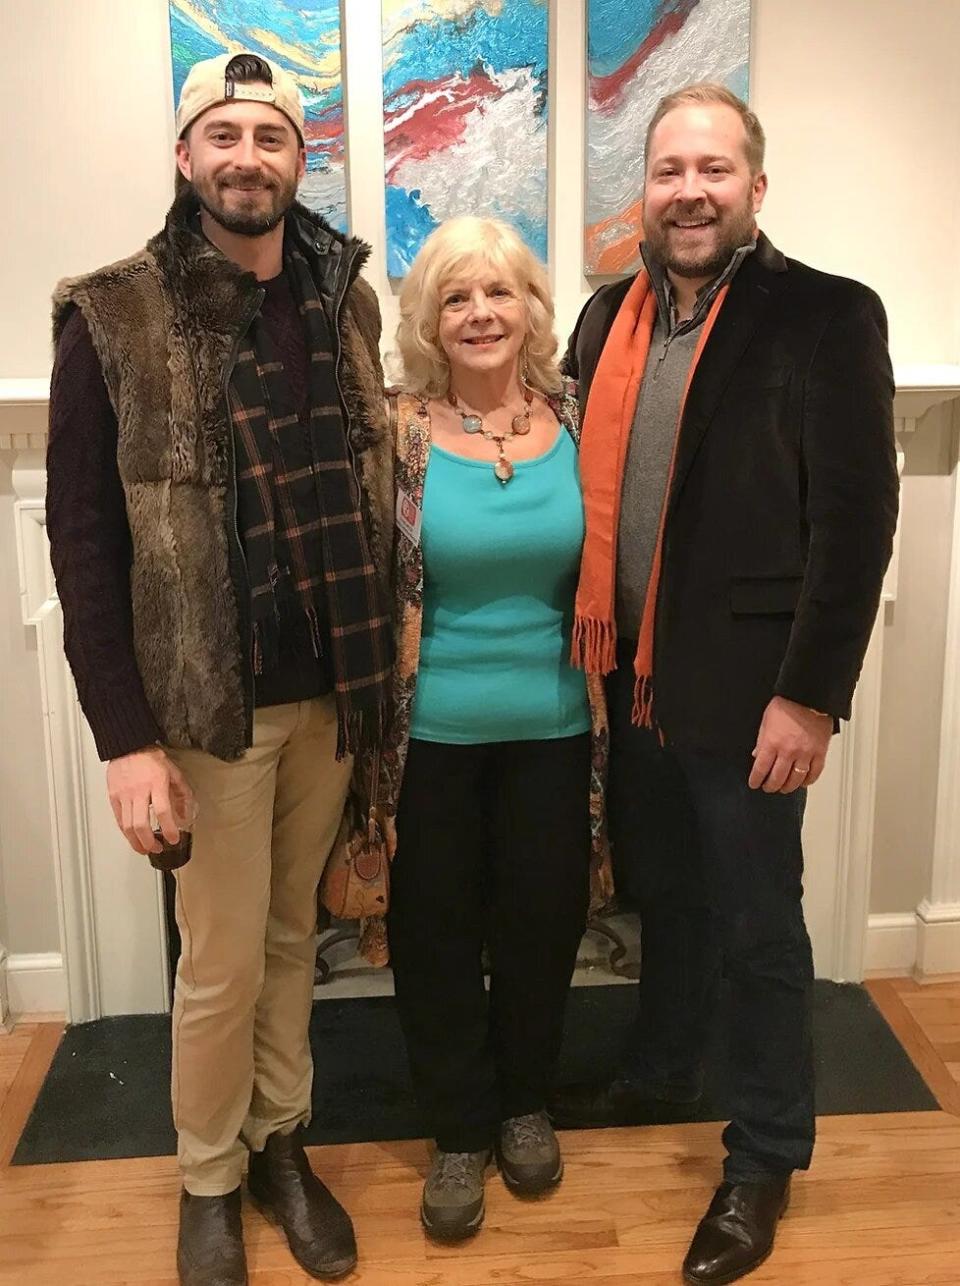 Dennis and Cody West, Elaine McGue's former neighbors, were part of the community of artists who lived at The Woodford.